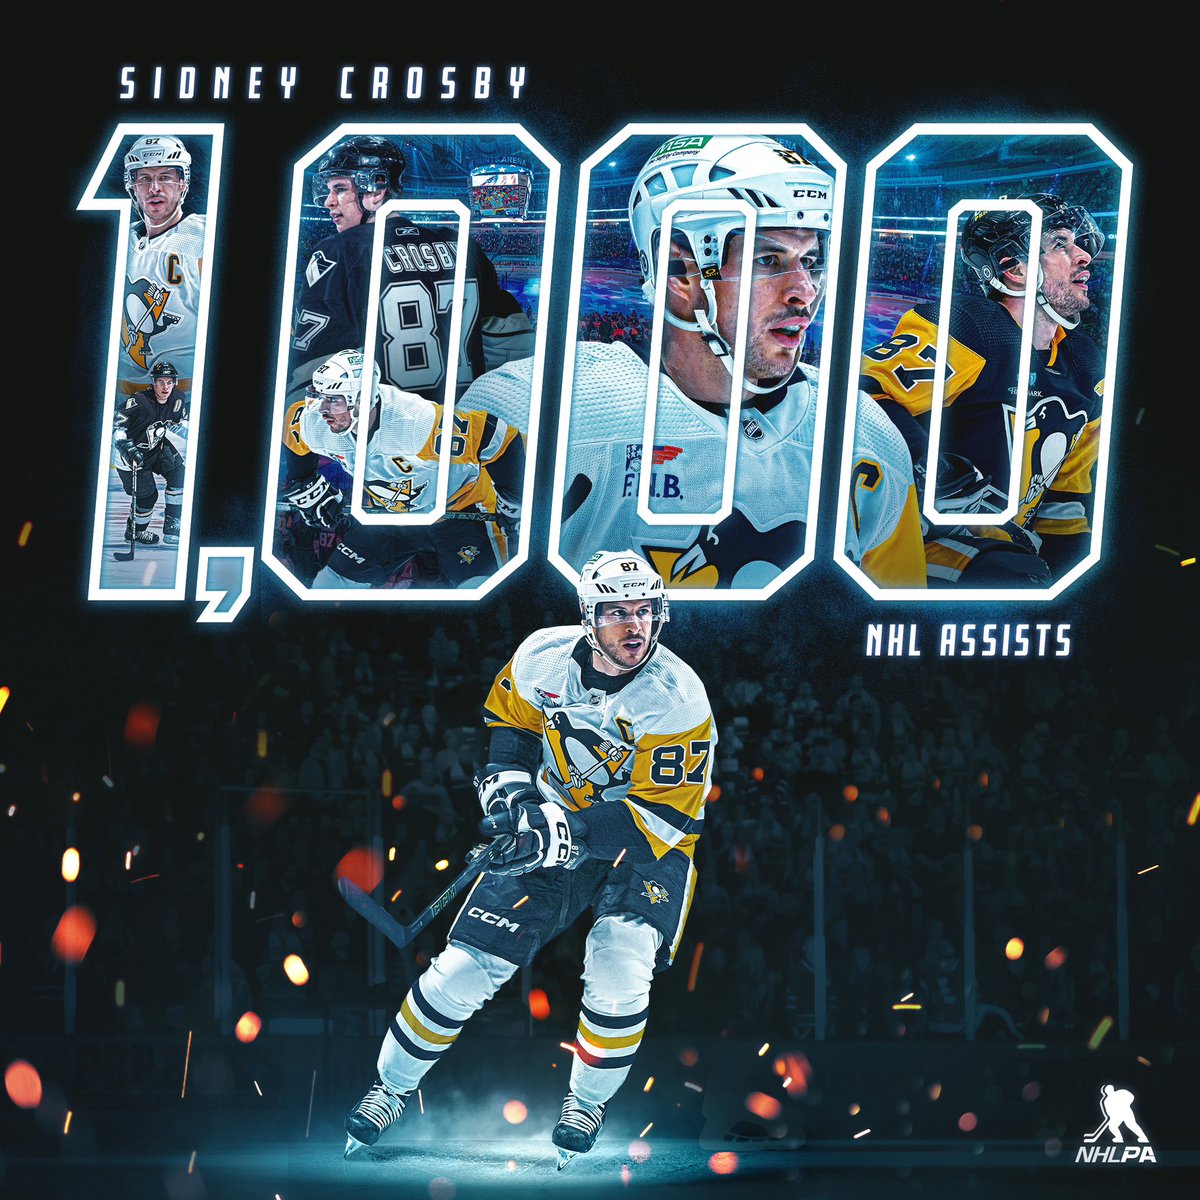 19 seasons and still dishin’ 🍎 Congratulations to @penguins captain Sidney Crosby on reaching 1,000 NHL career assists on an OT winner!